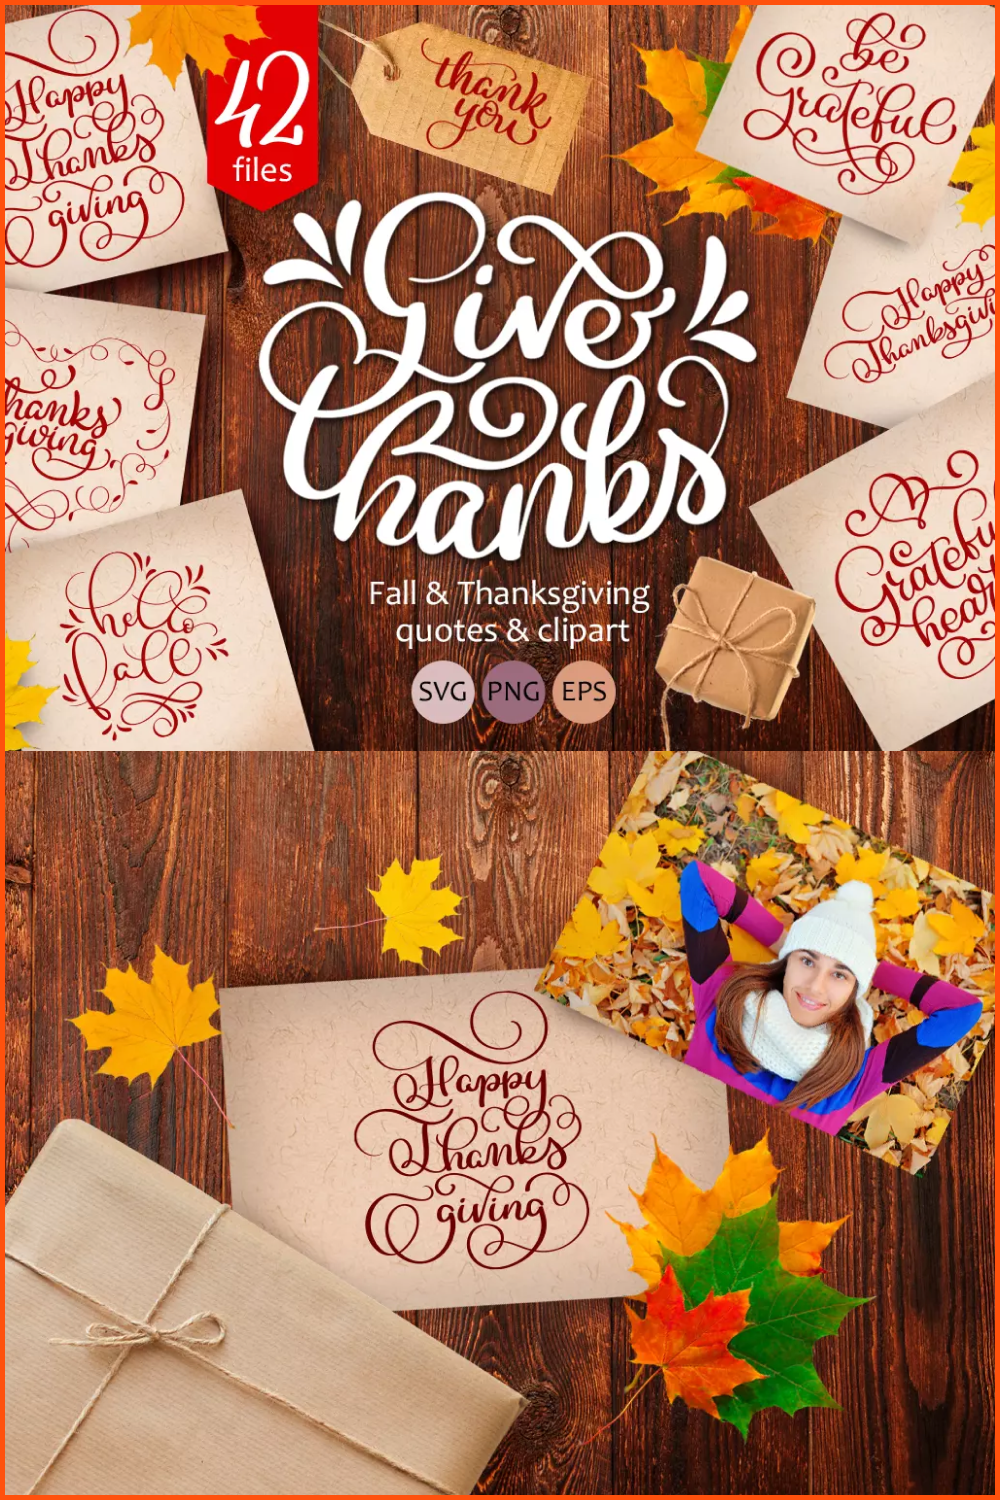 A collage of bright pictures with calligraphic inscriptions on the theme of Thanksgiving.